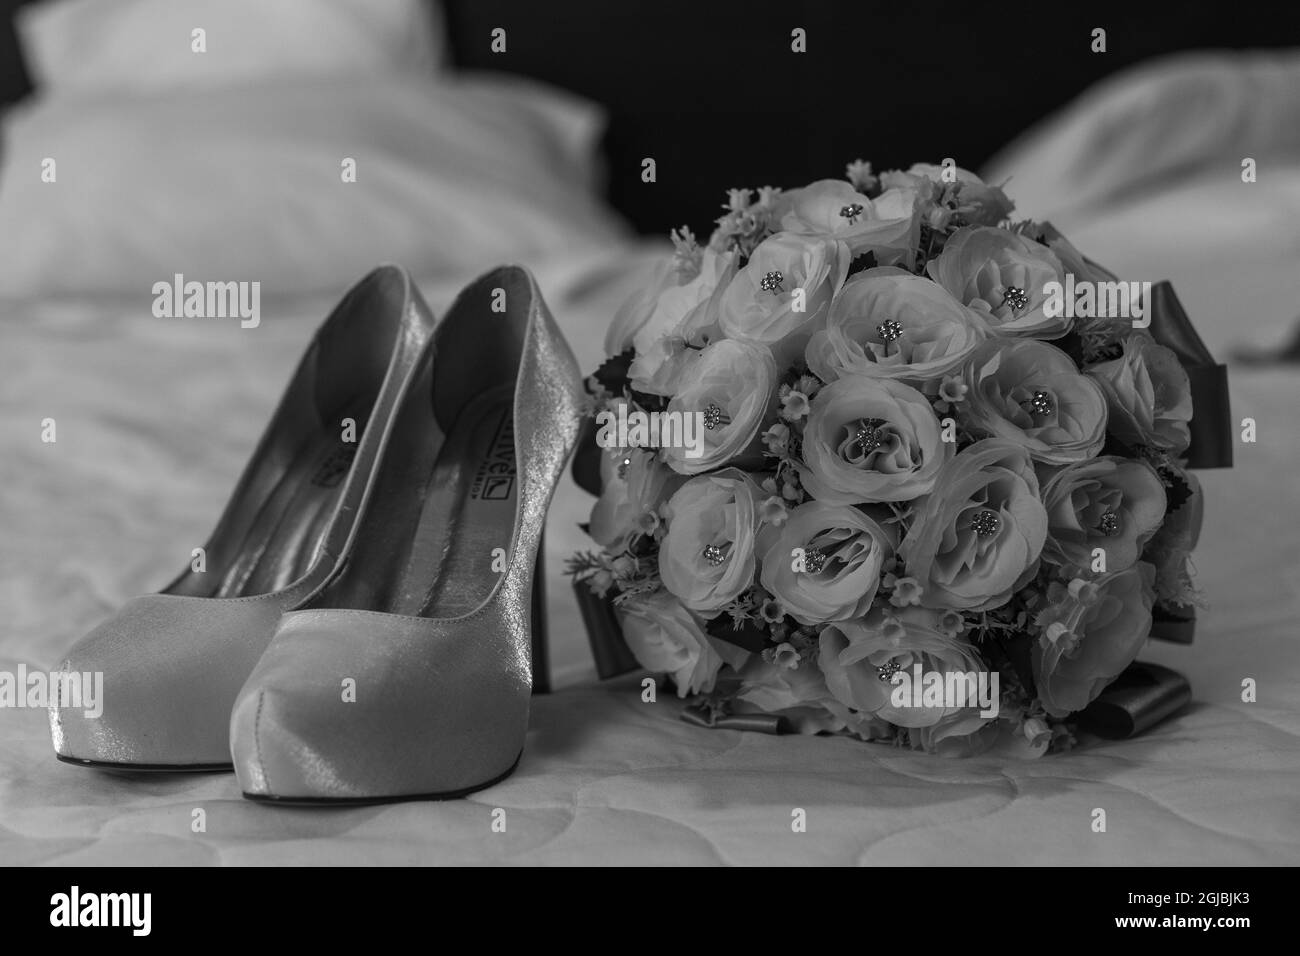 Grayscale of woman shoes near the flowers Stock Photo